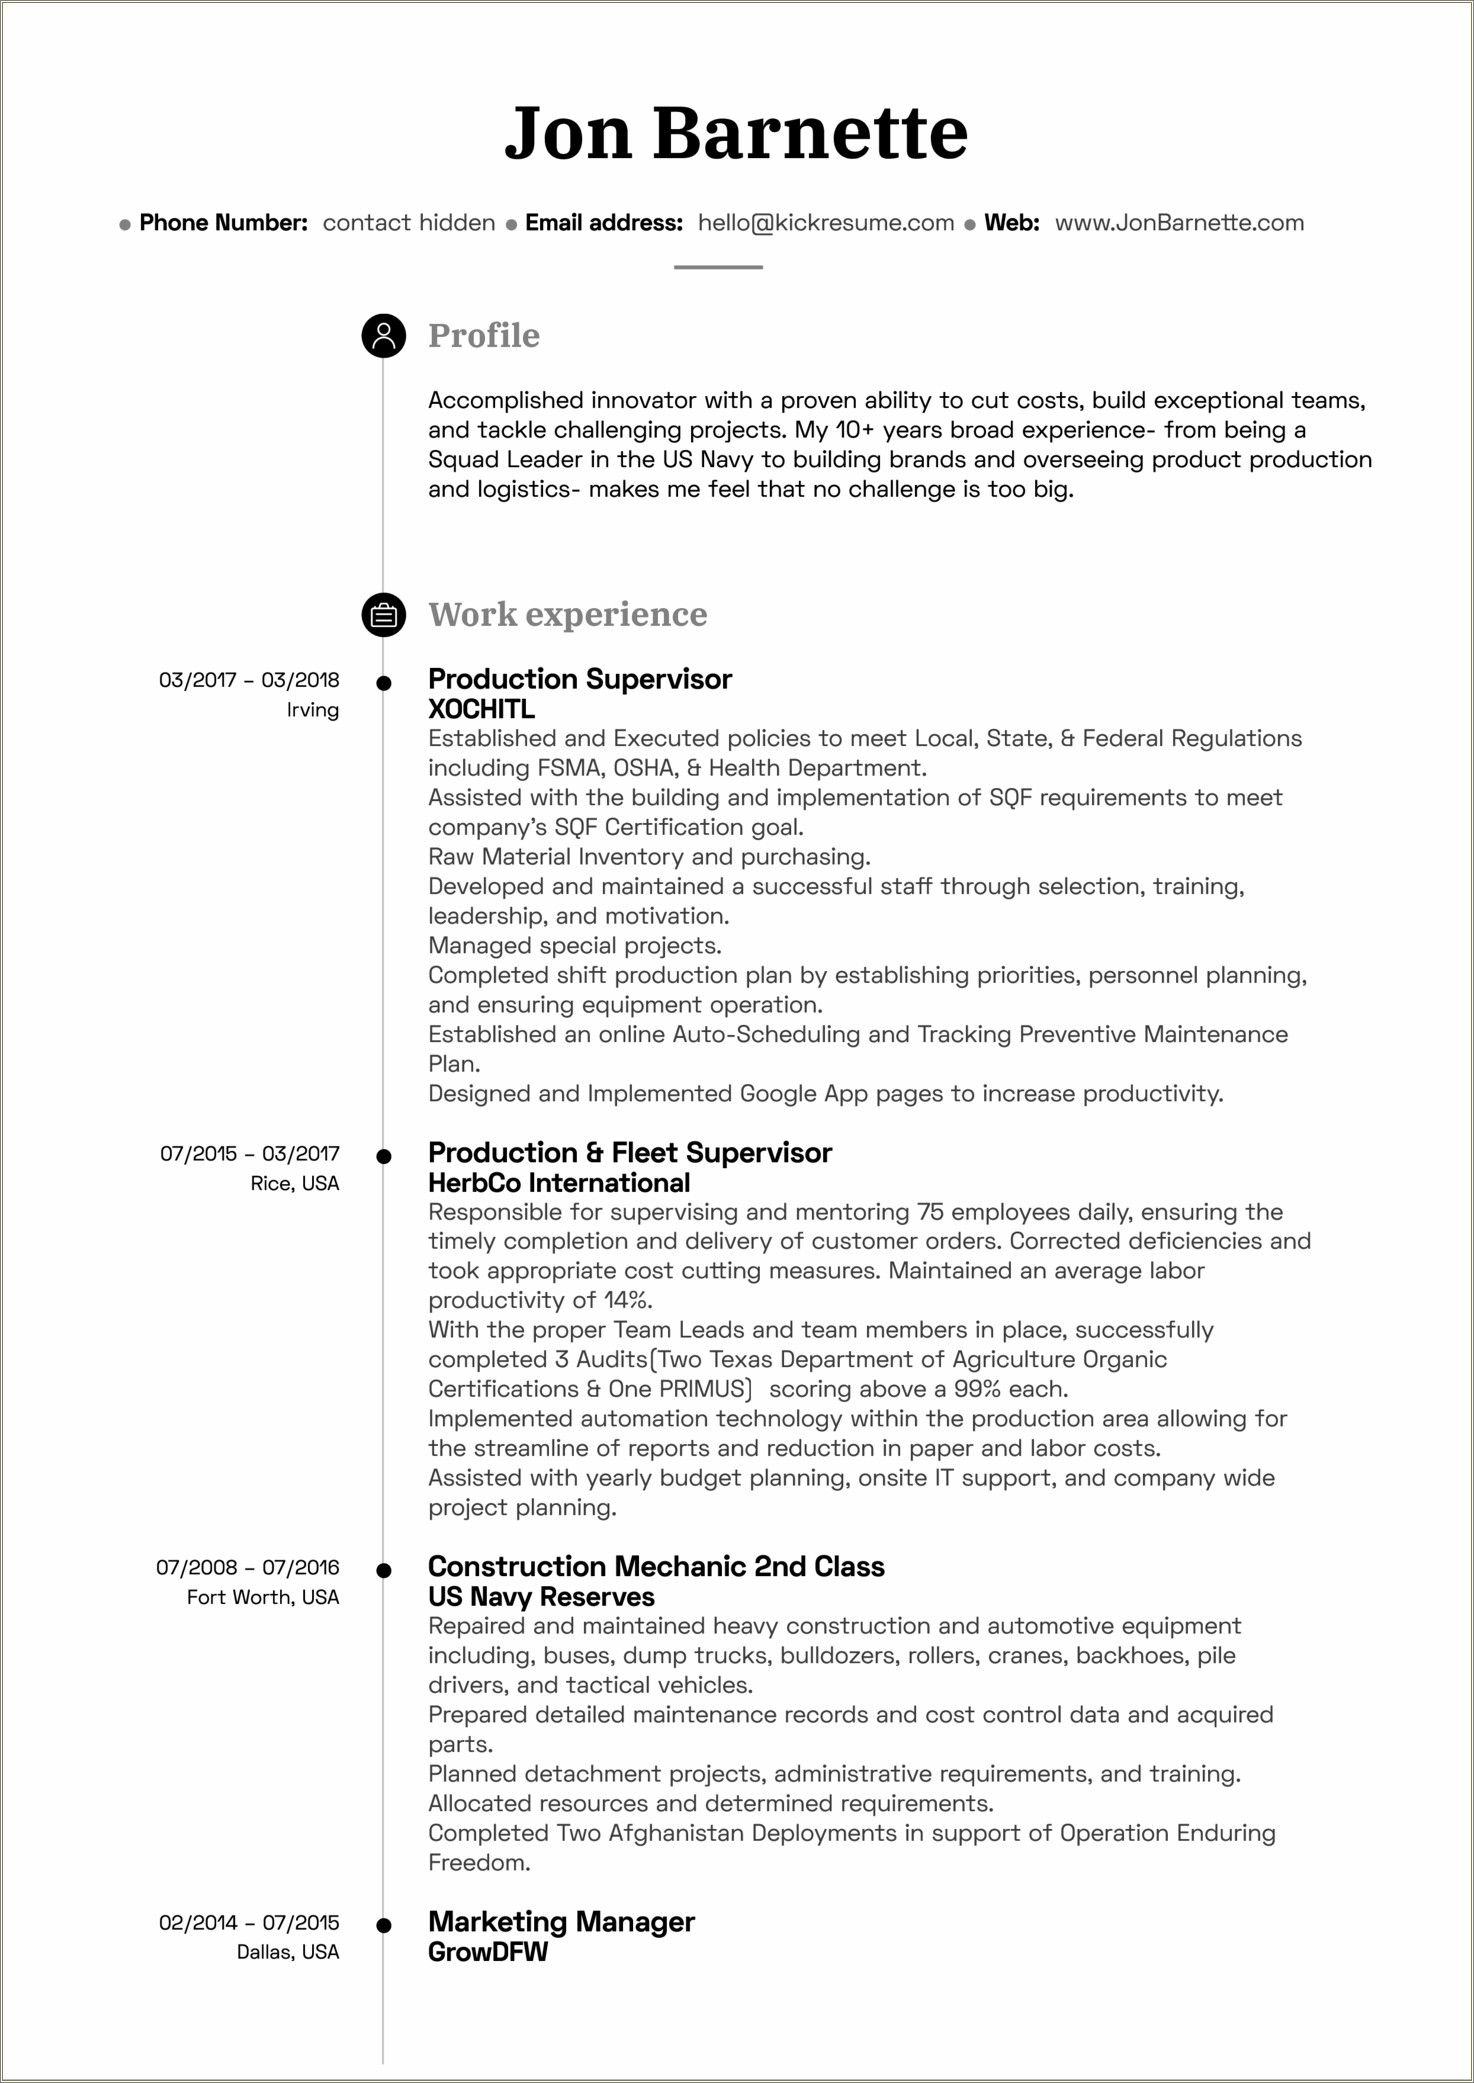 Resume Bullet Points For Production Manager